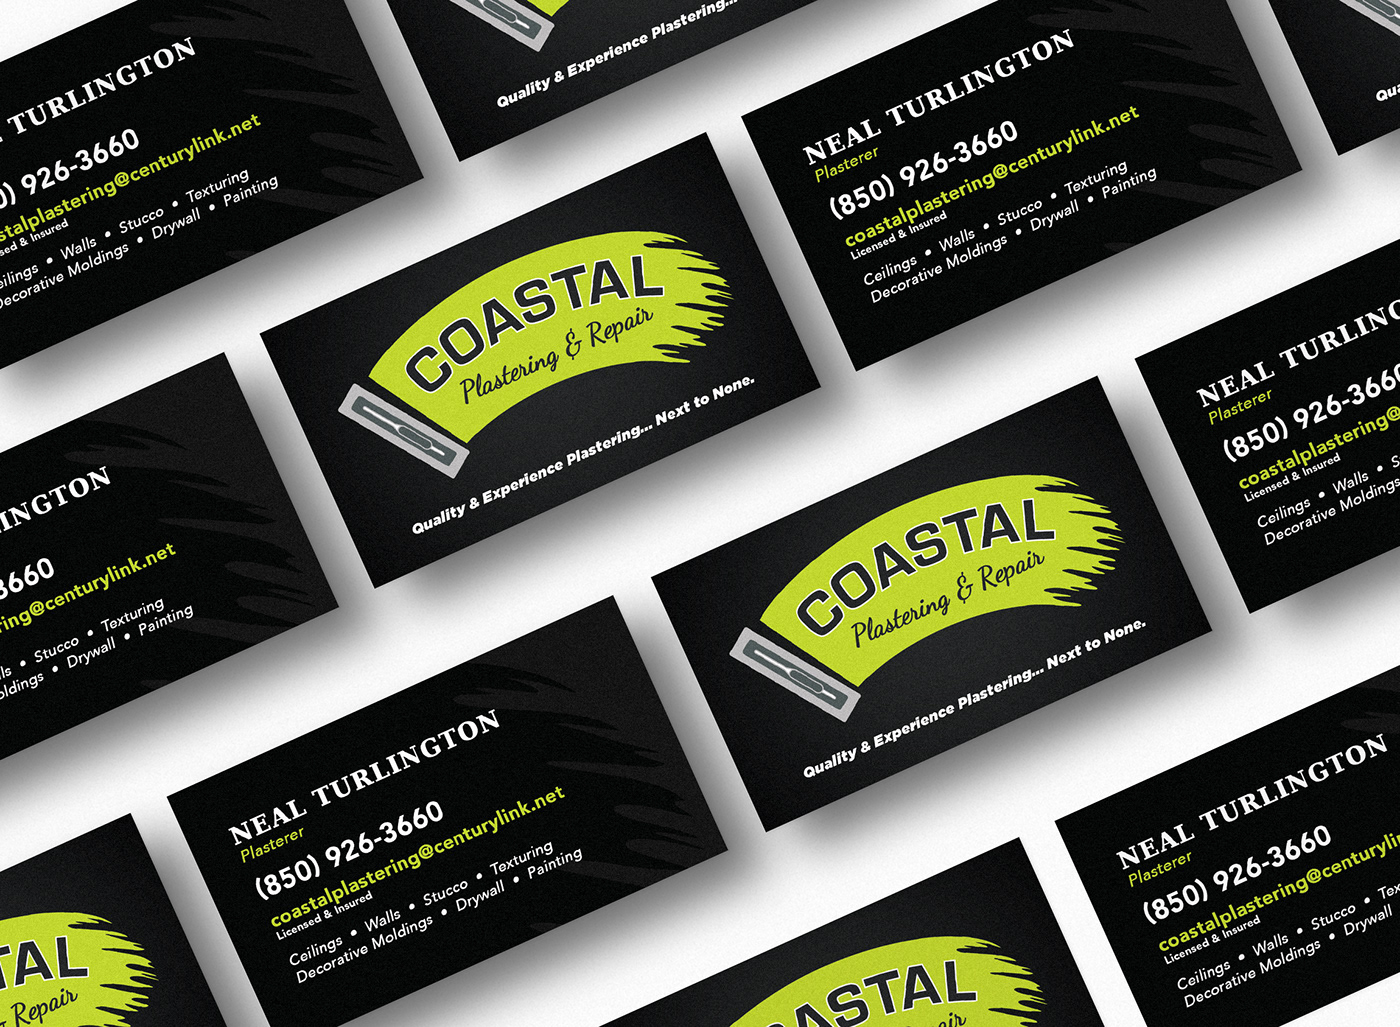 Business card design for Coastal Plastering & Repair. Shows main logo on a black background.